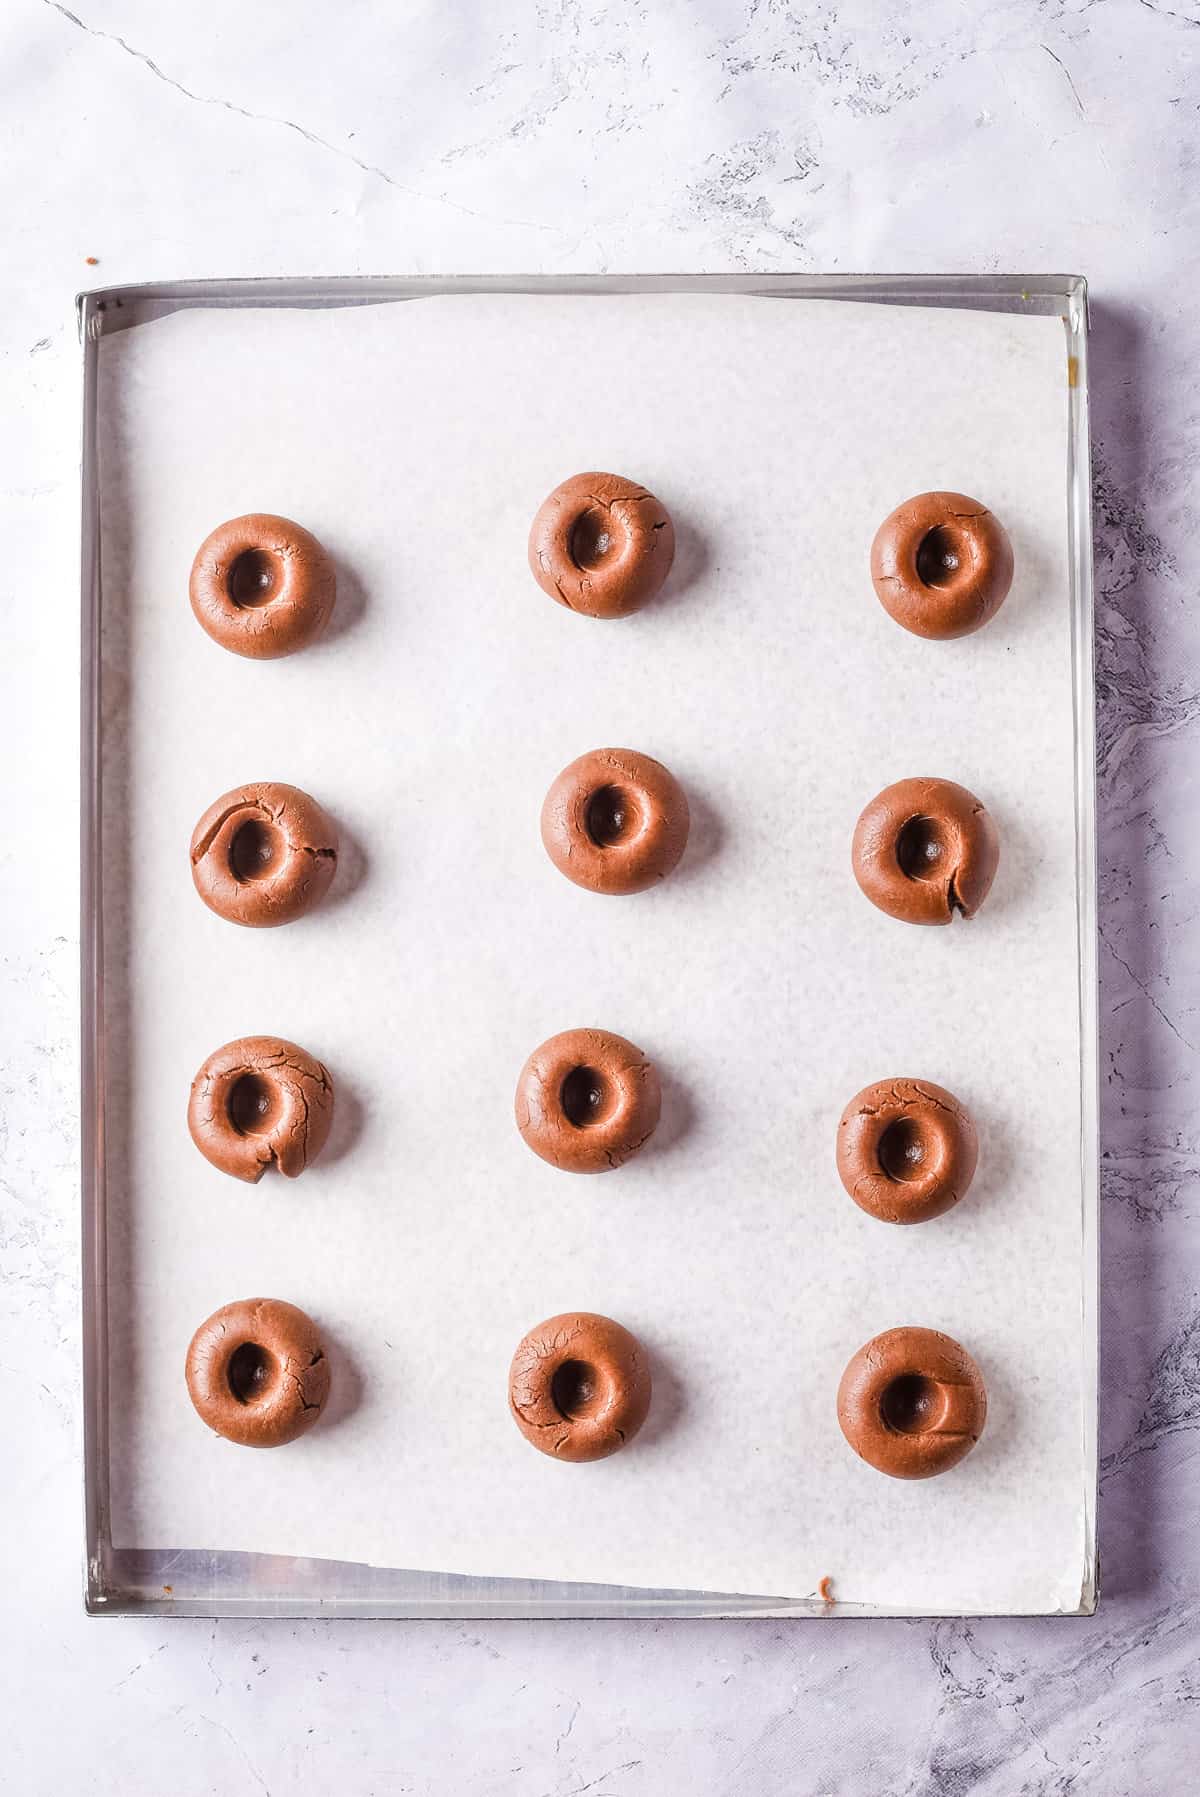 Overhead view of baking sheet with cookie dough balls pressed down to create wells in them.